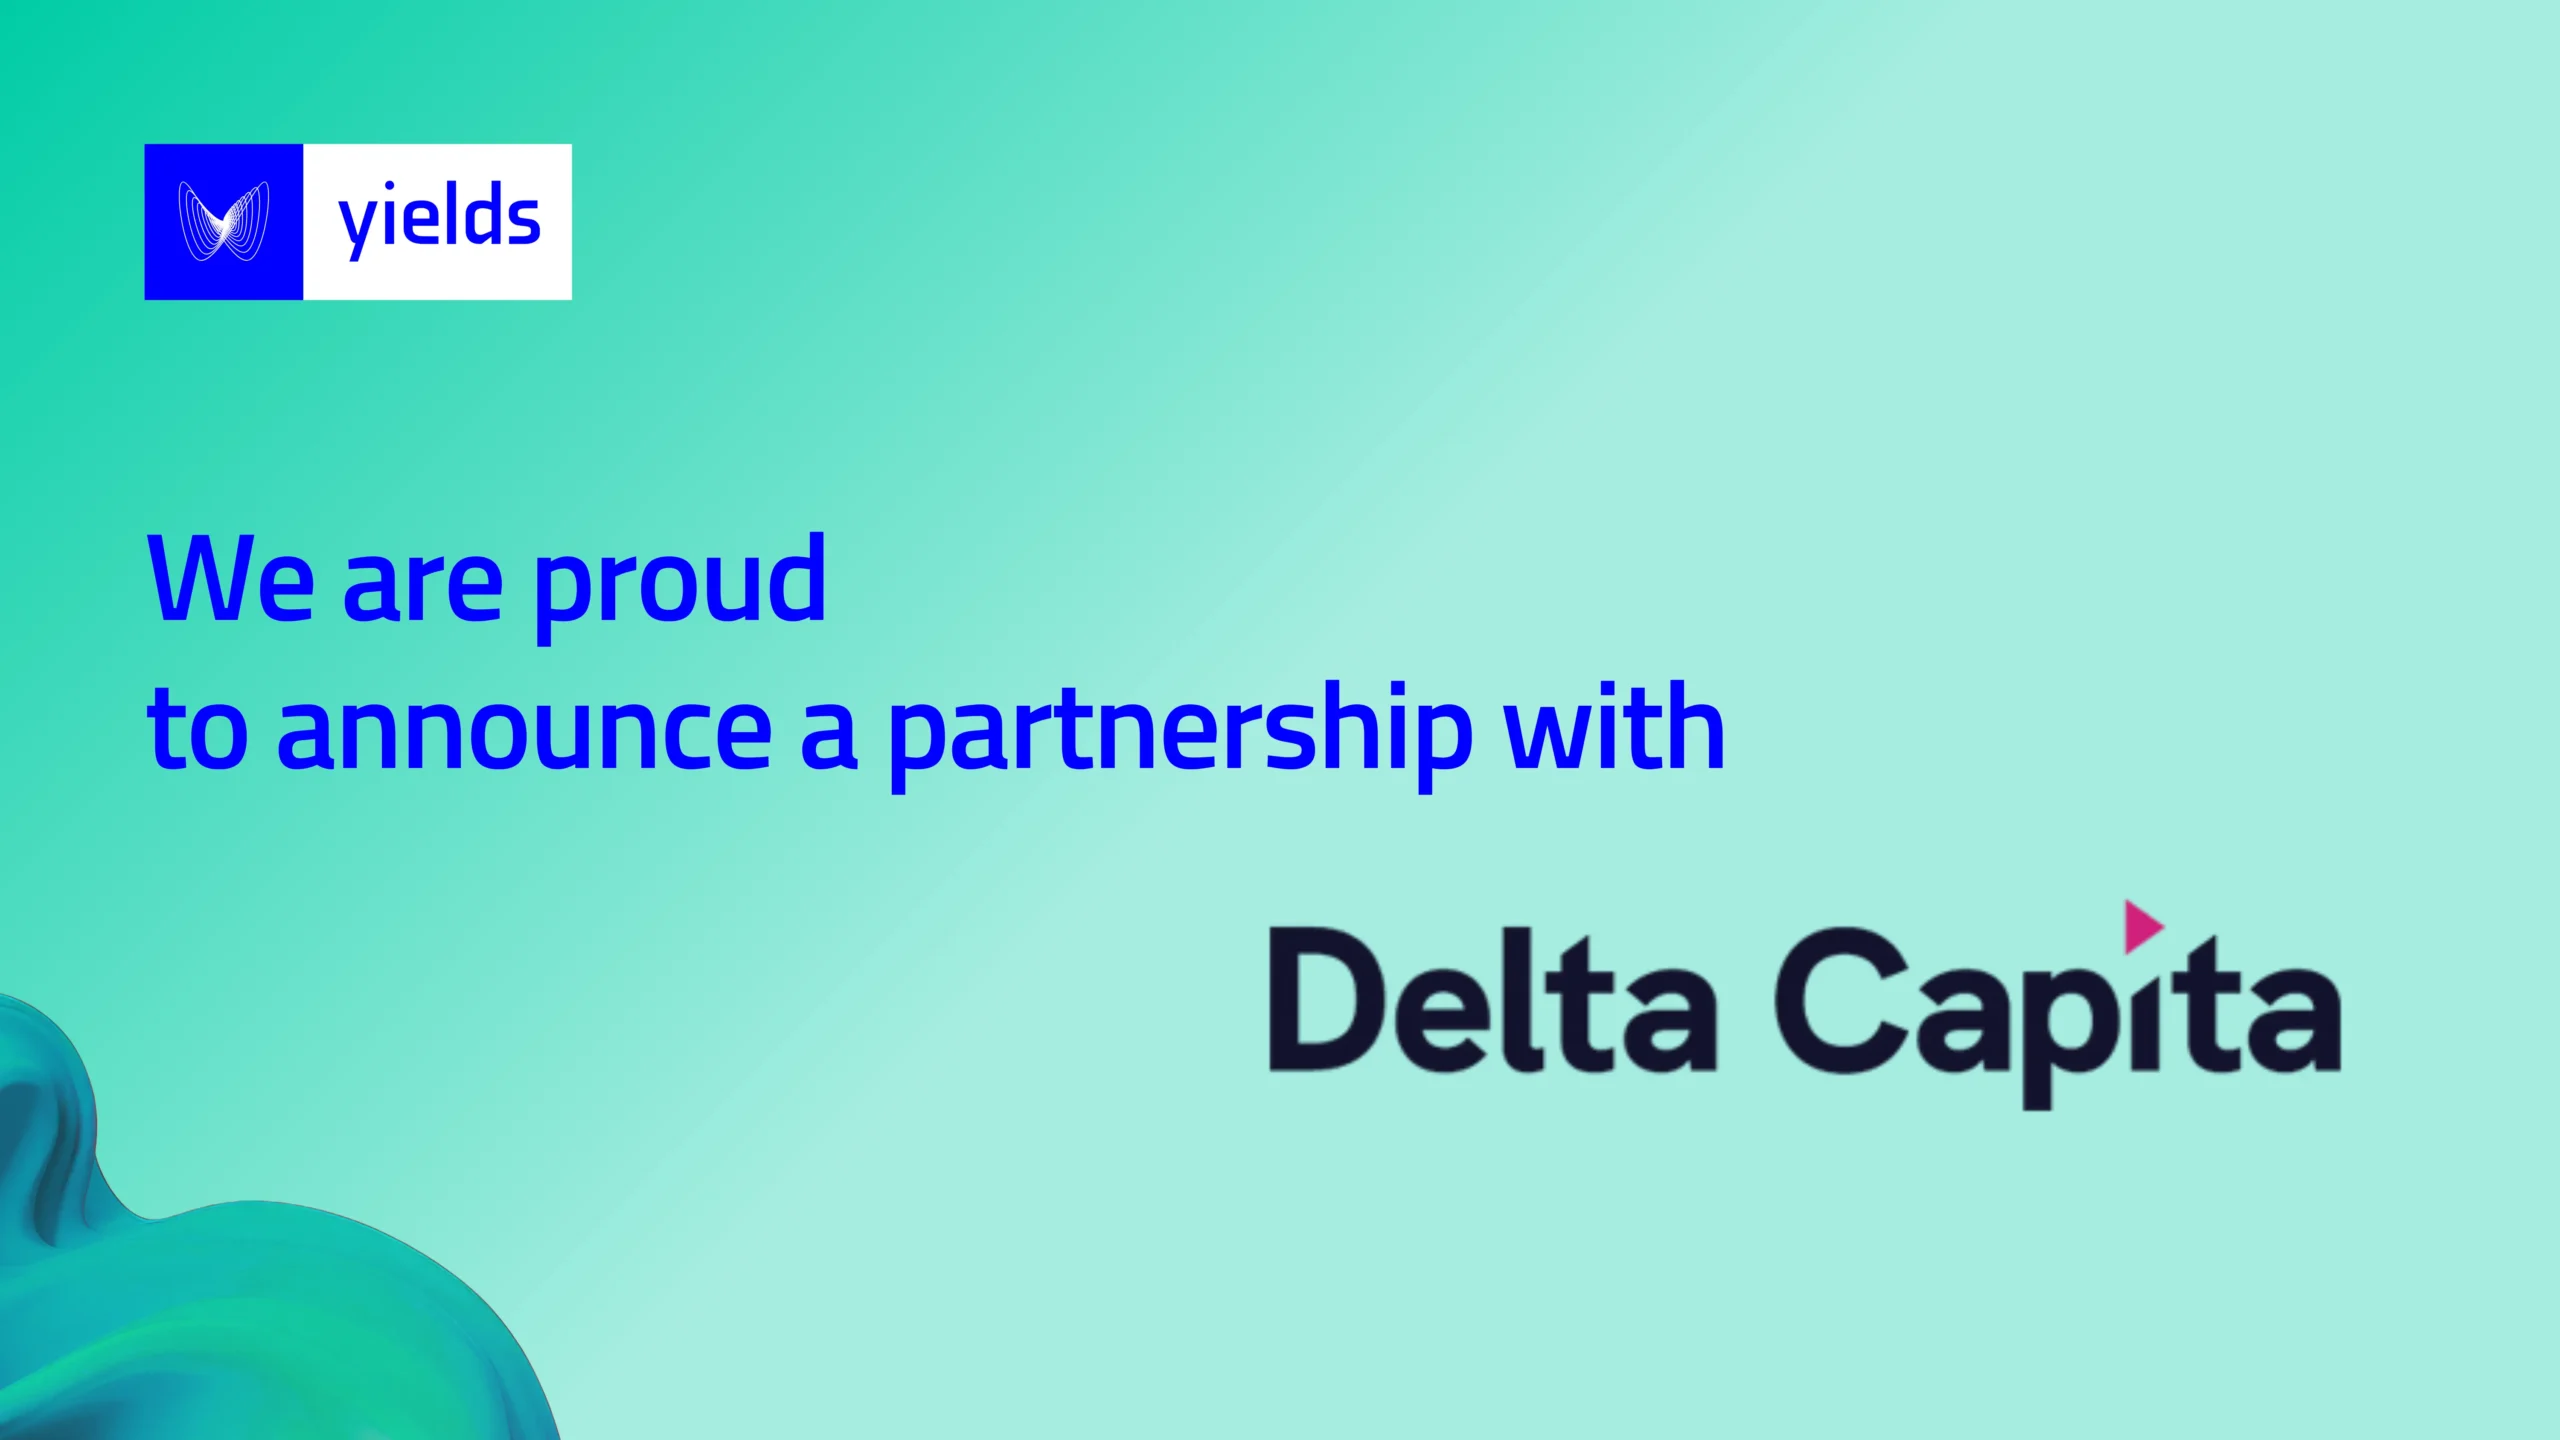 Delta Capita and Yields announce alliance